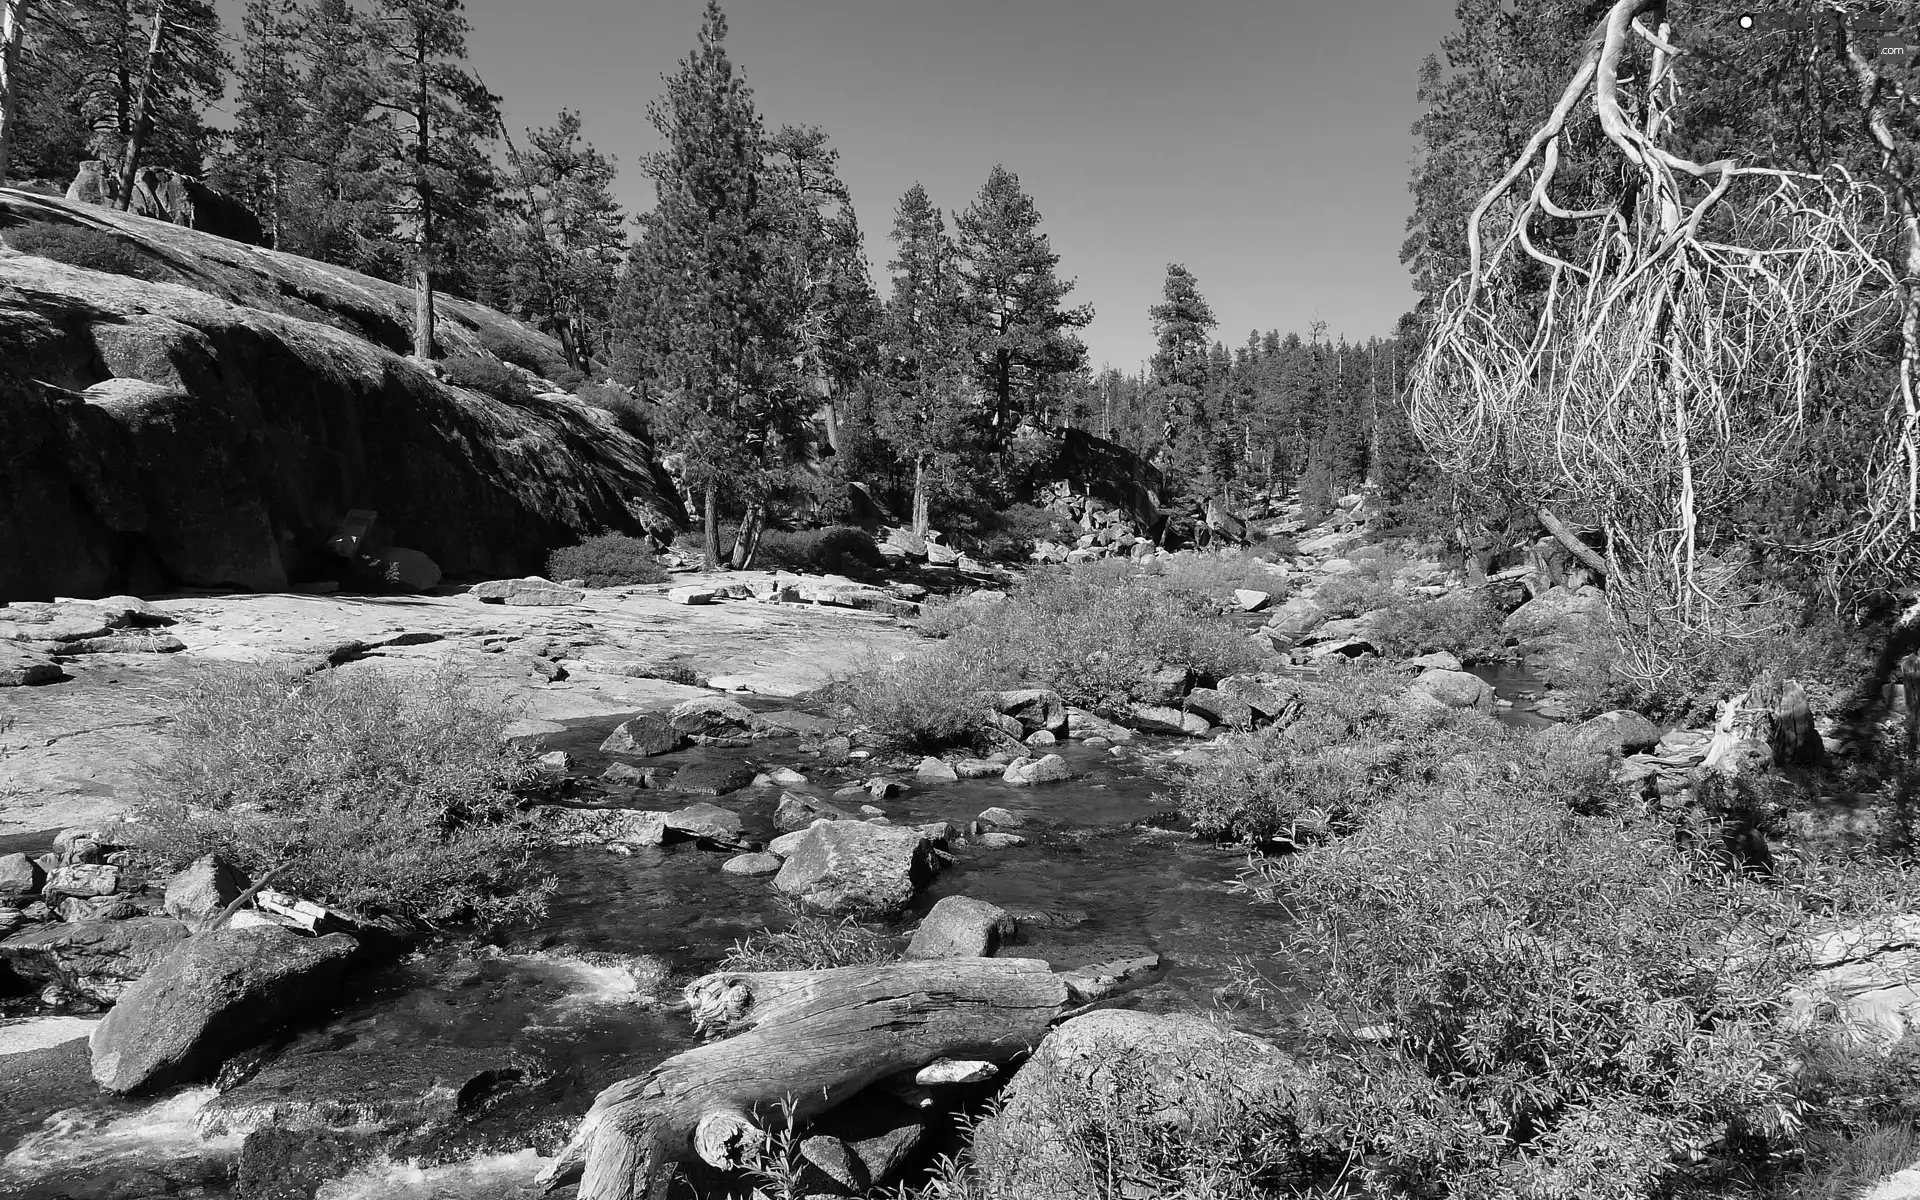 Yosemite National Park, The United States, River, forest, Stones, State of California